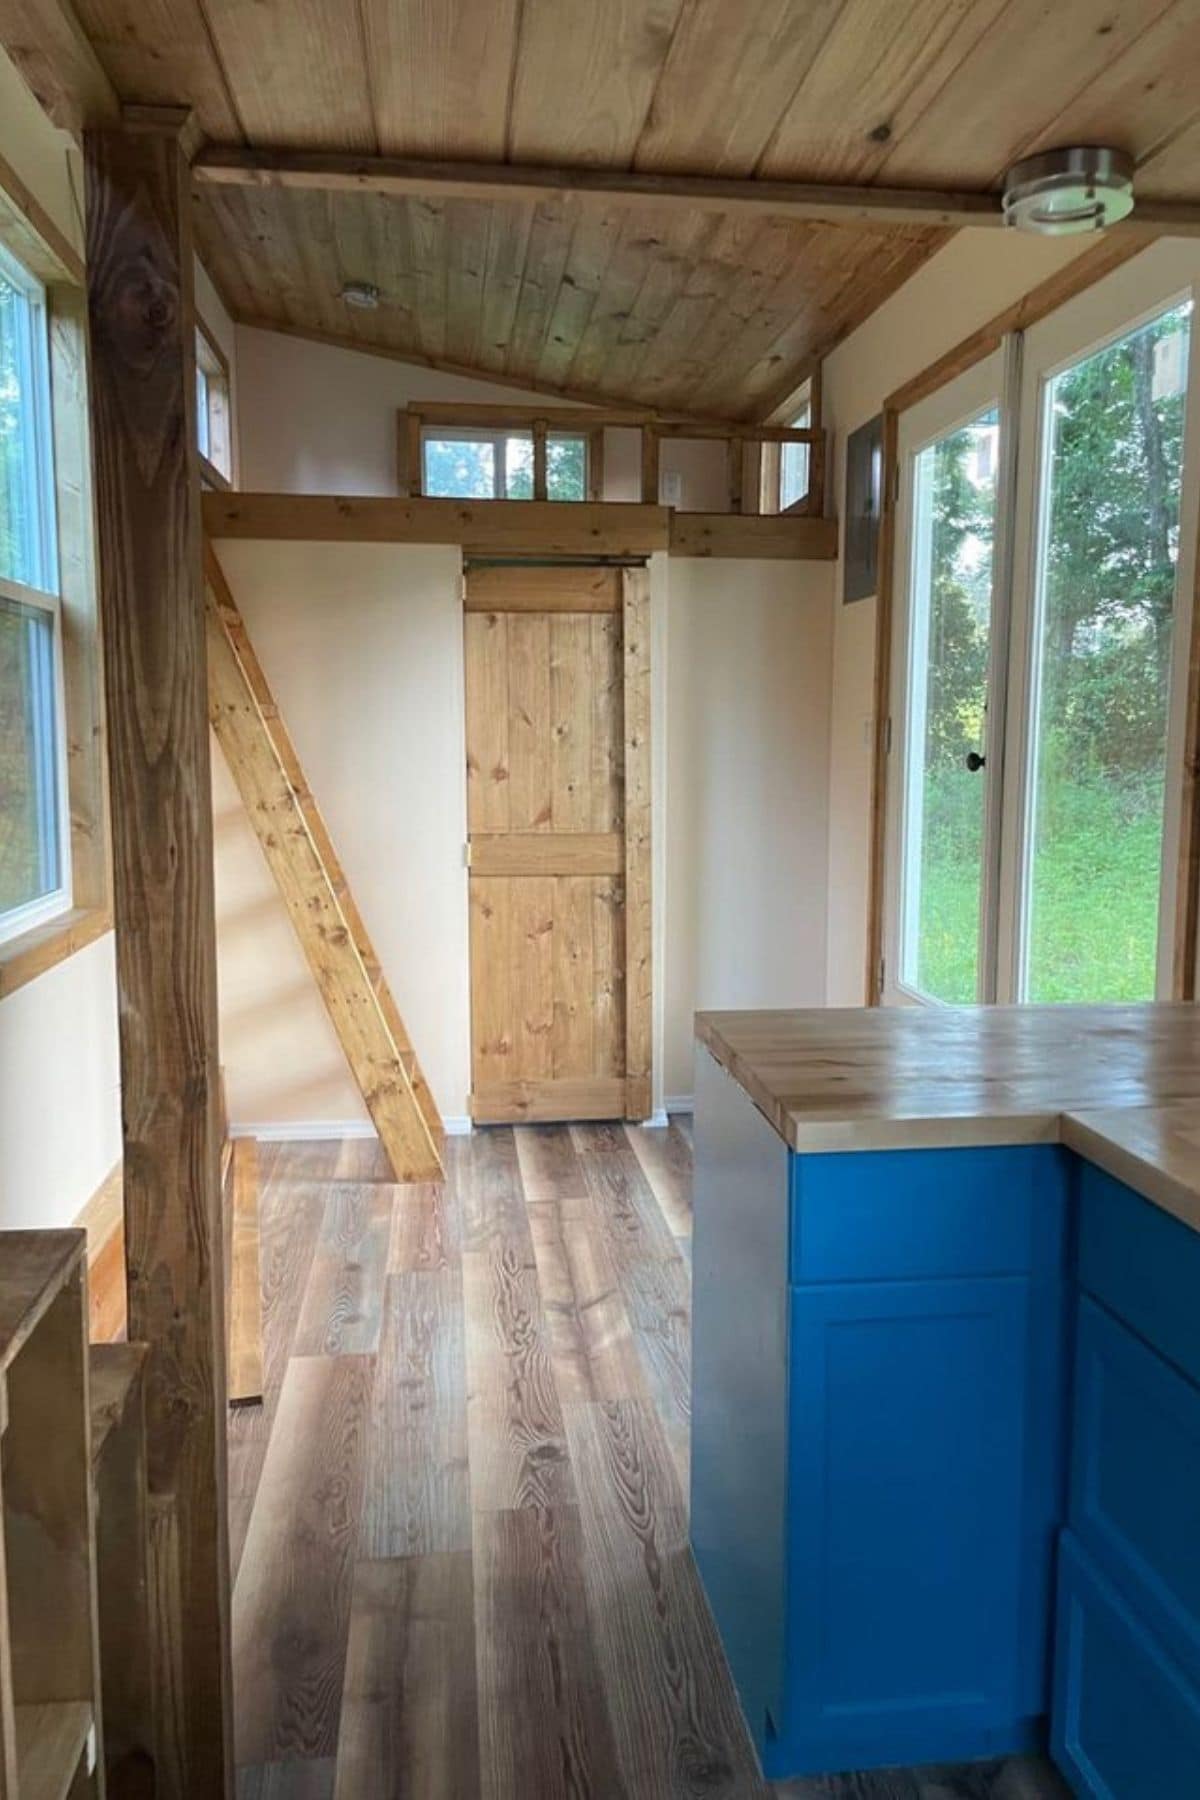 View from kitchen to bathroom pocket door with small loft above